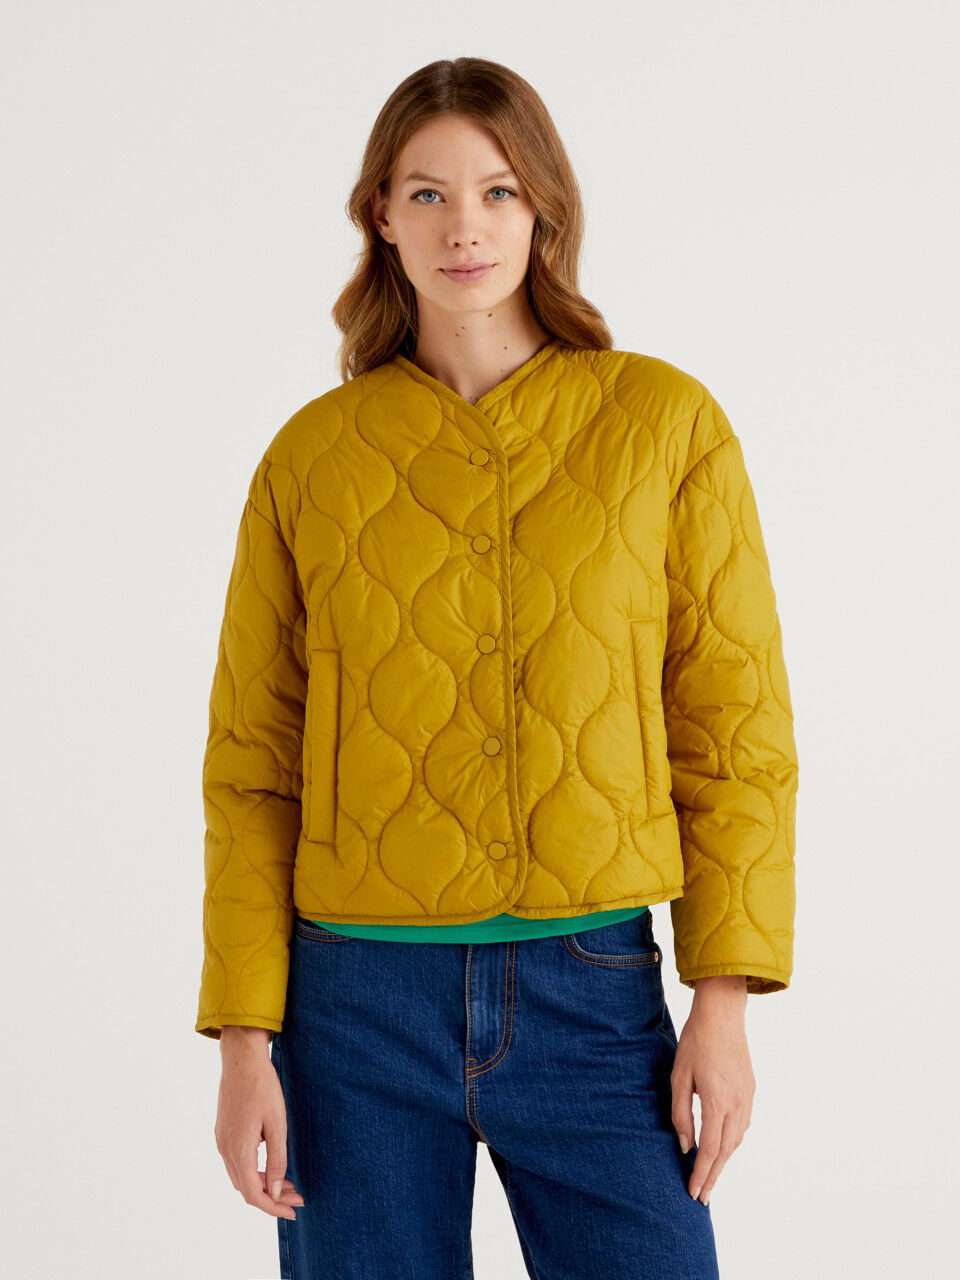 Women's Jackets and Coats Collection 2021 | Benetton- BEST BRANDS FOR JACKETS